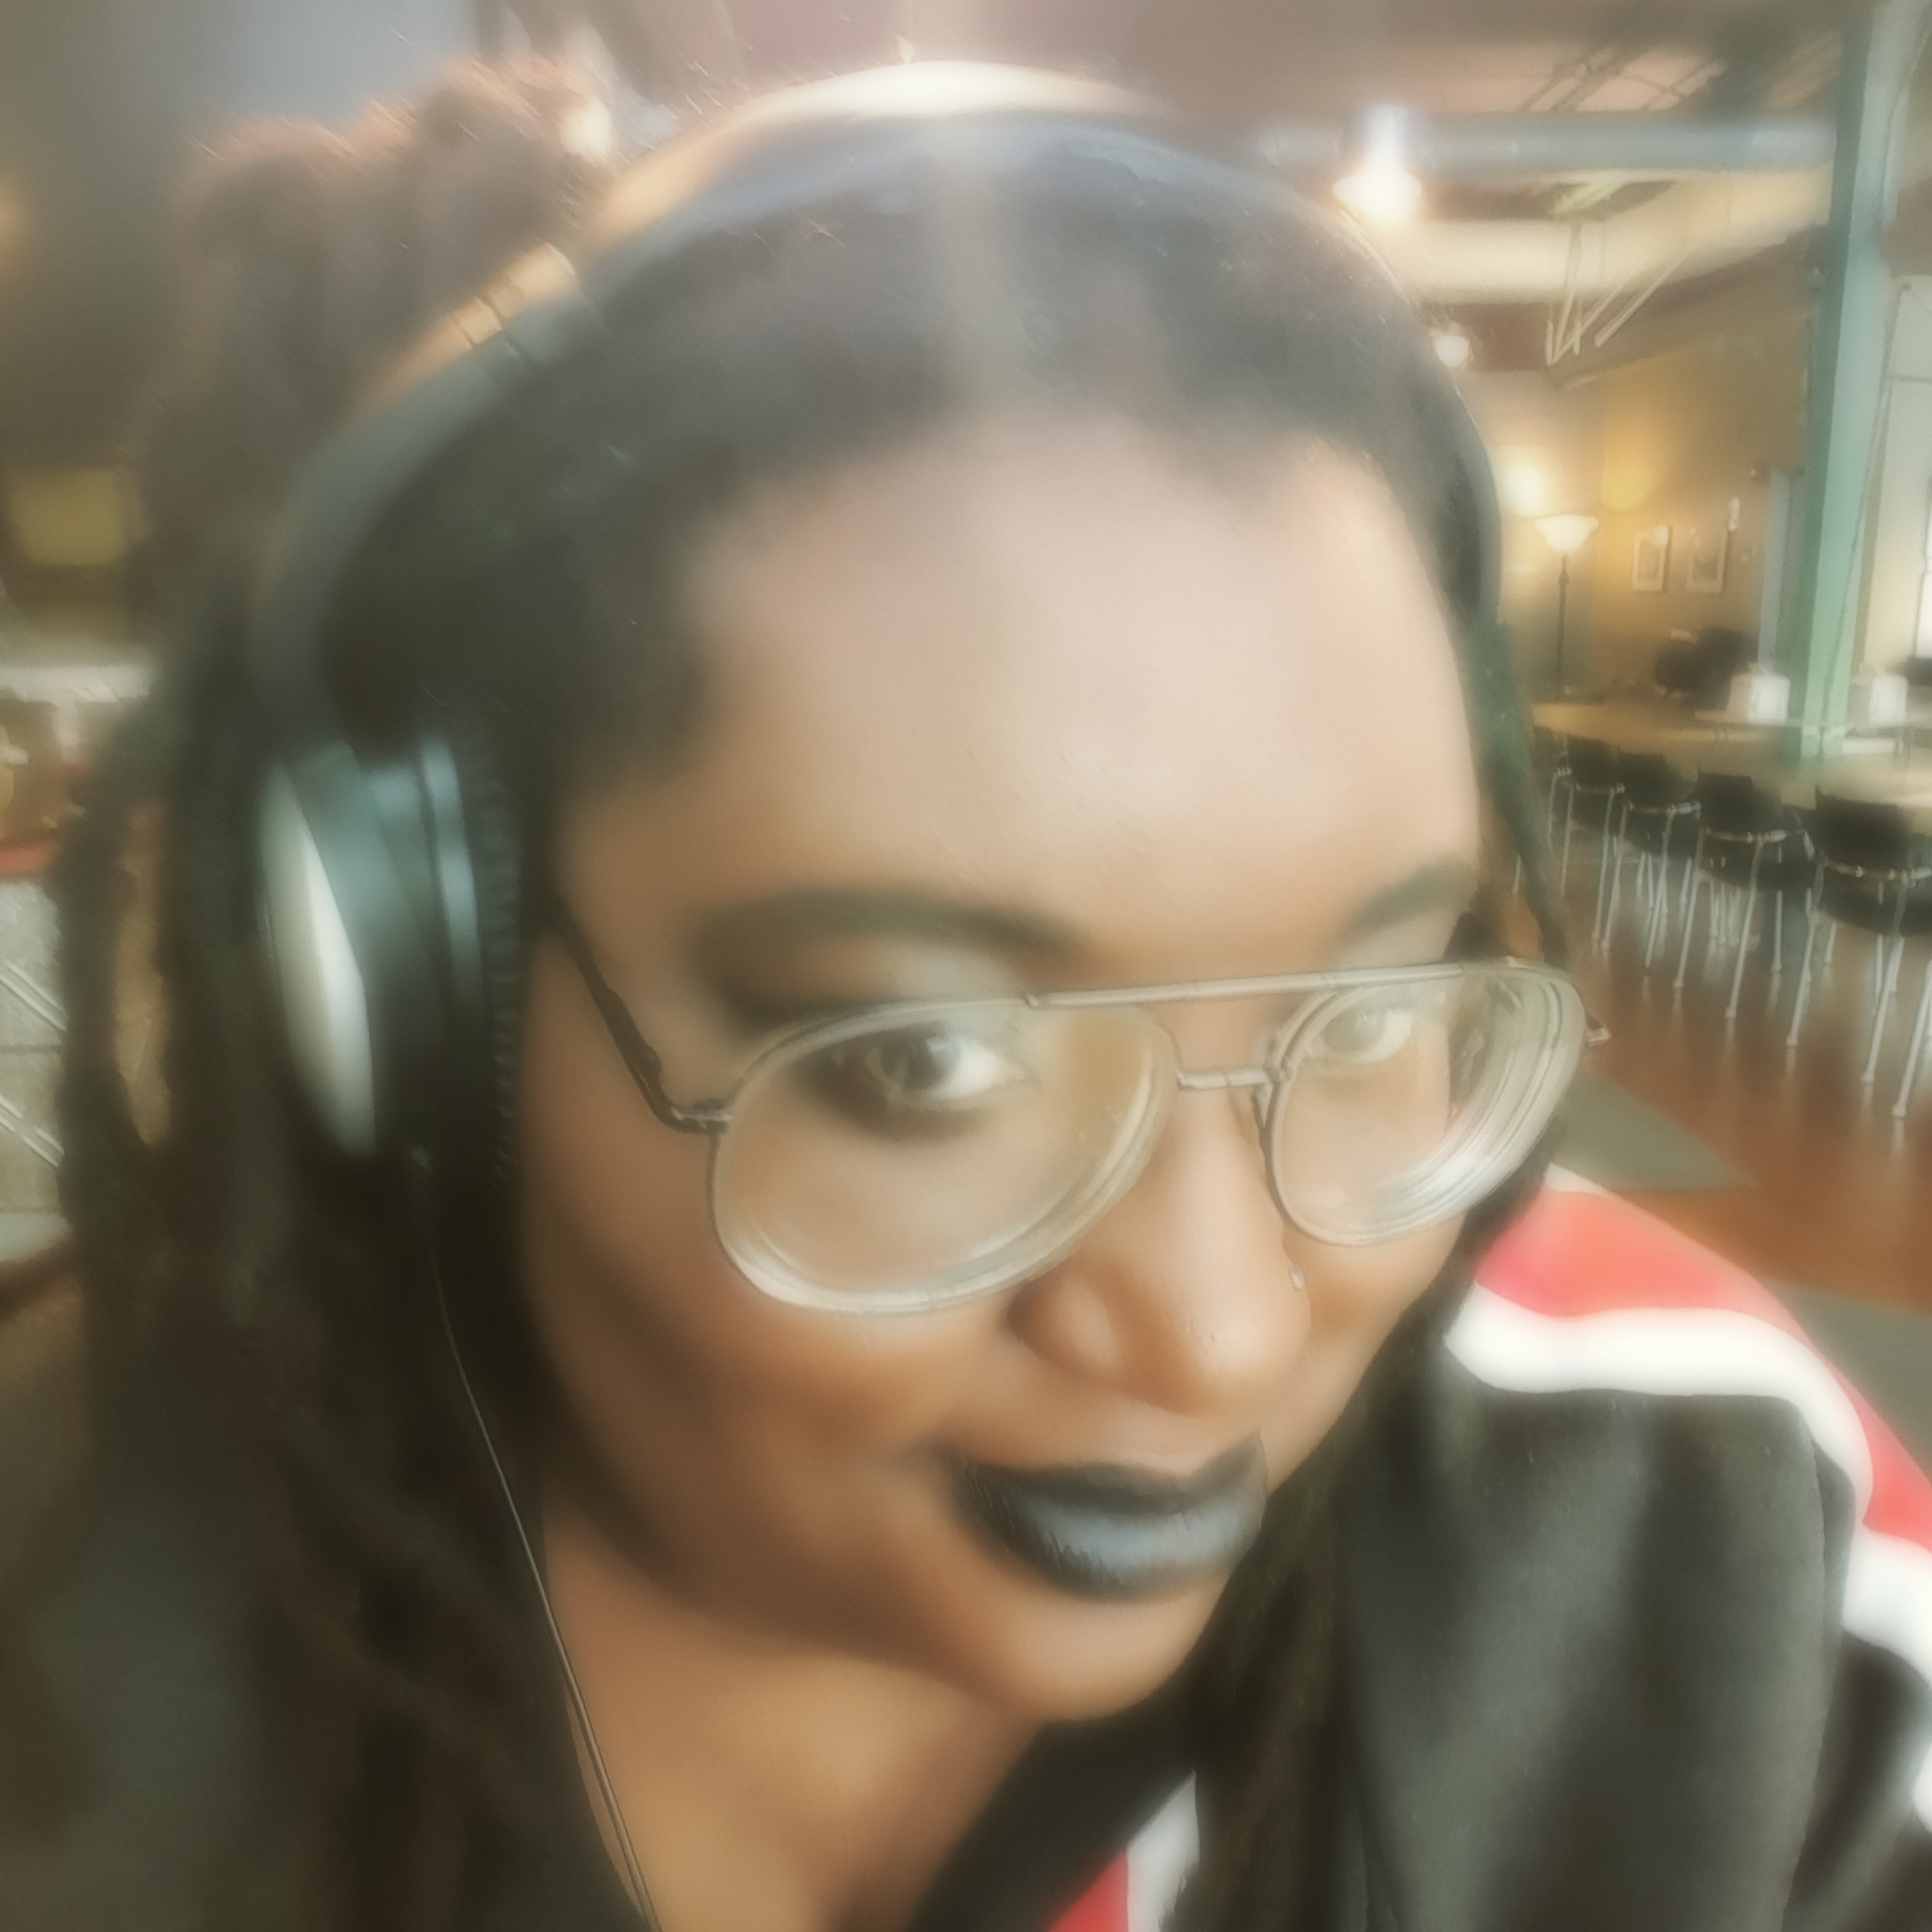 A black woman, the blog writer, upclose of her face. She is smirking, wearing a pair of large headphones and large framed glasses, with long black dreadlocks.